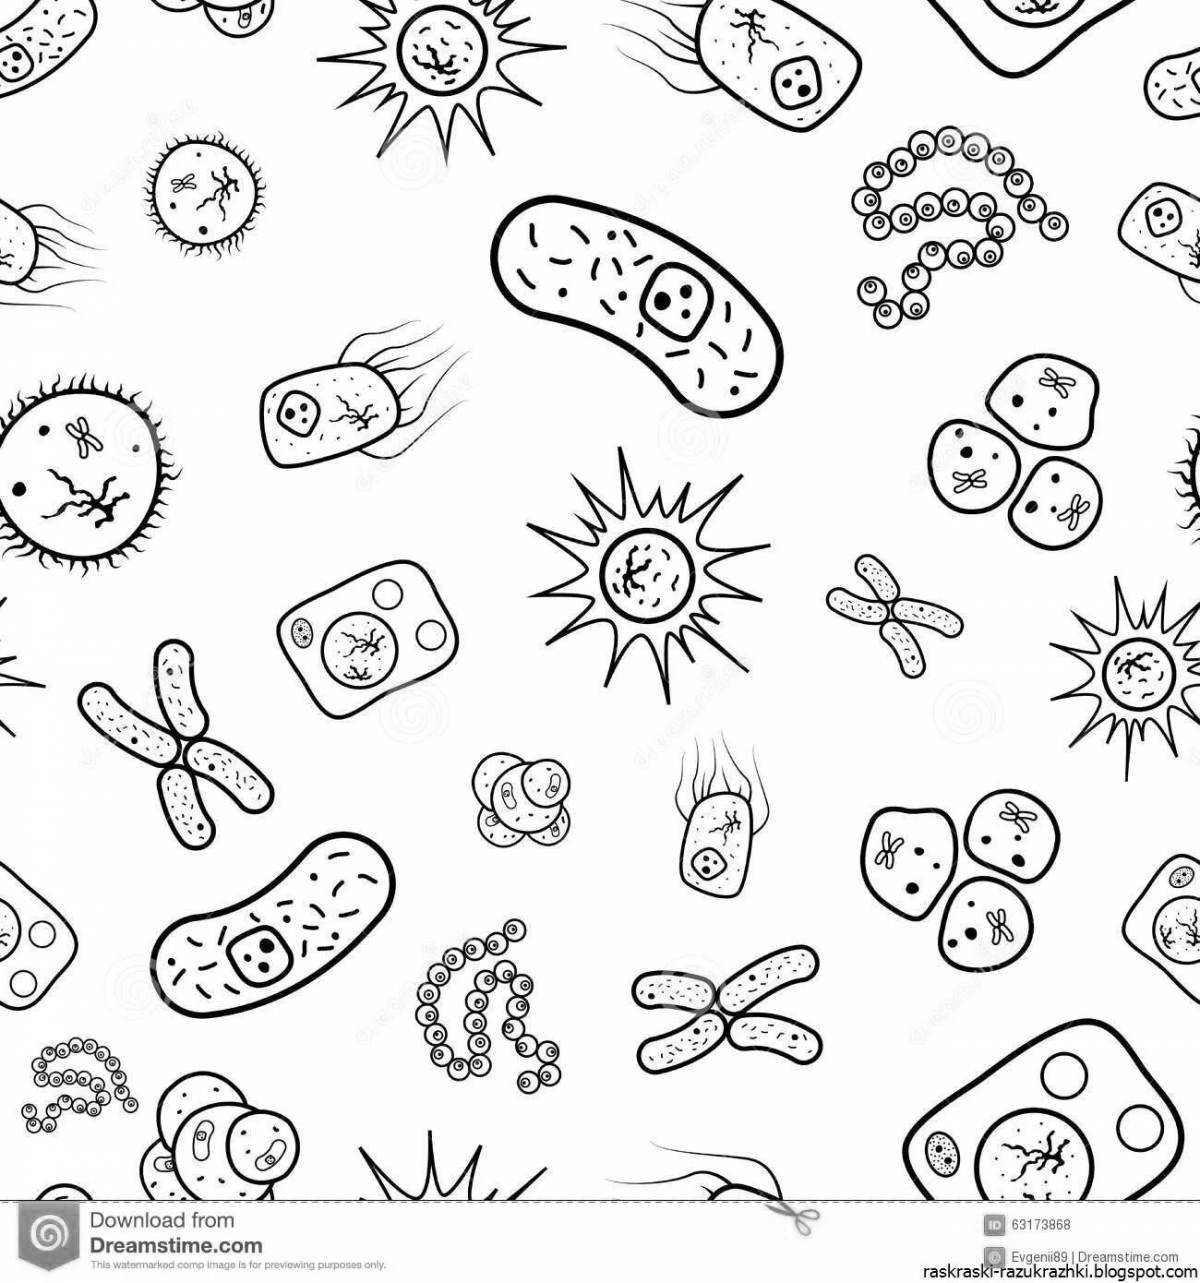 Colored microbes coloring pages for kids